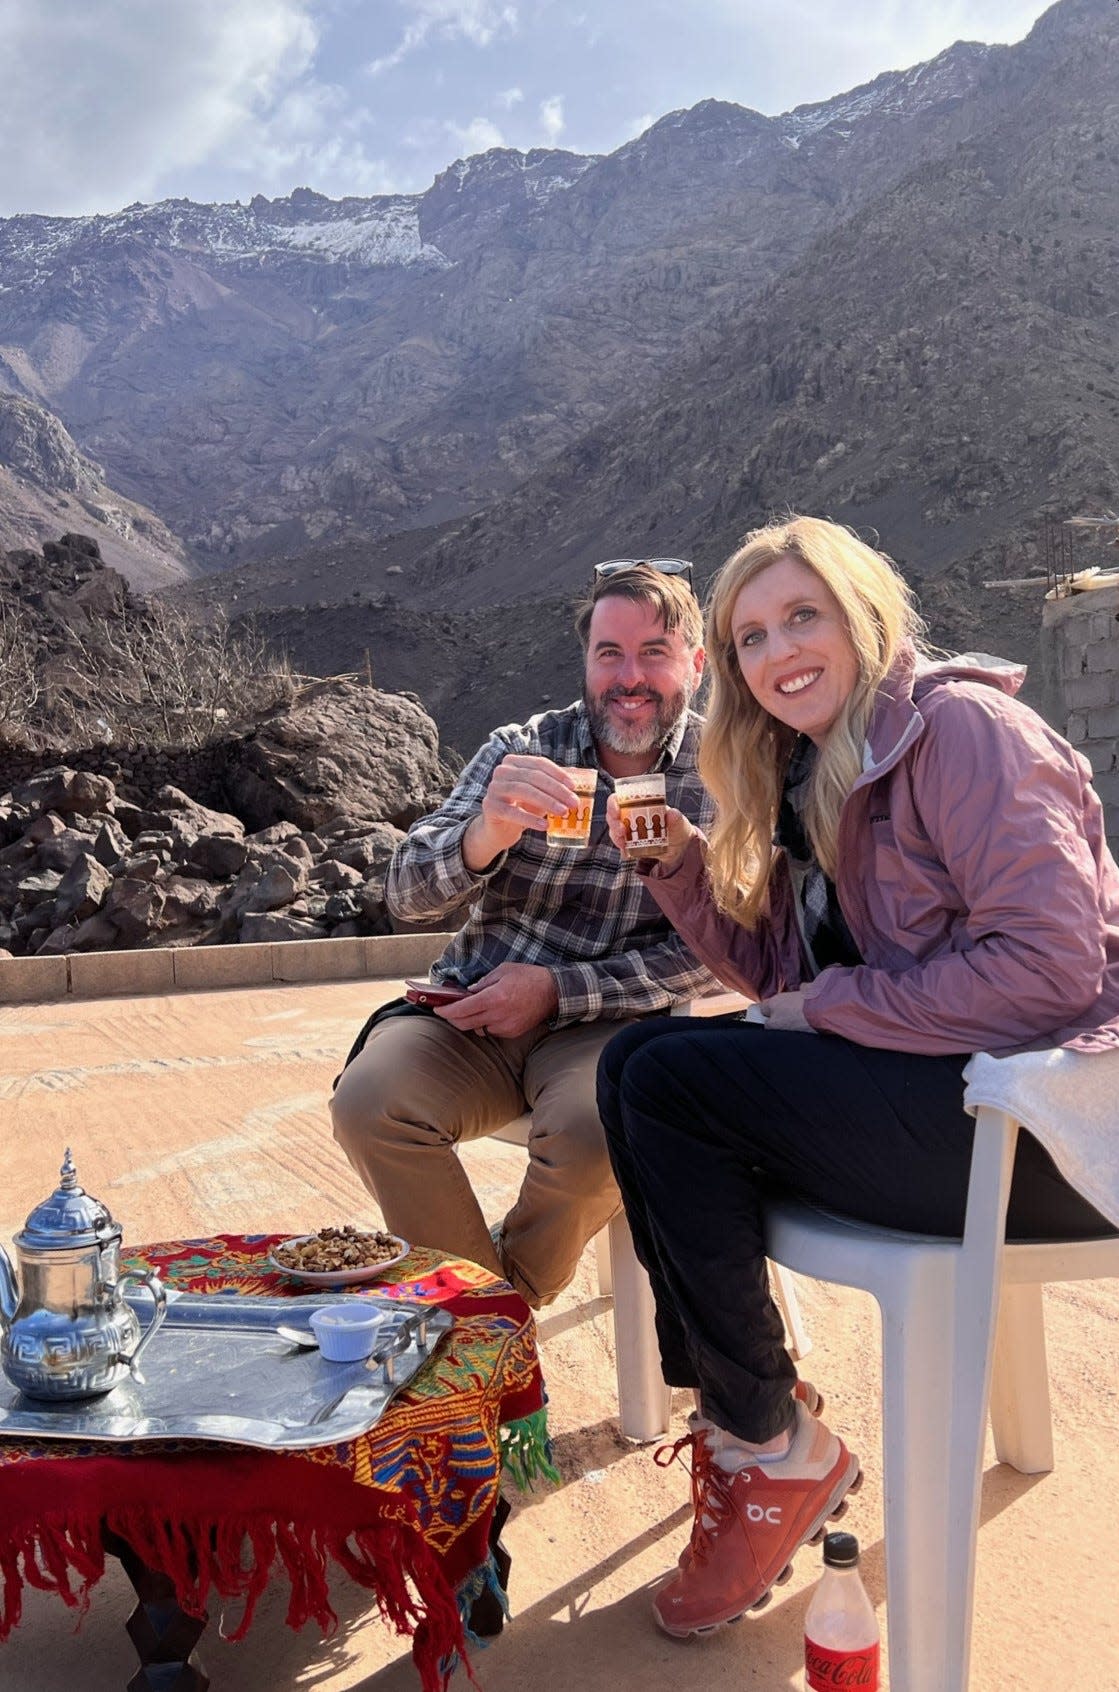 Jesse and Ashley Bermel of North Liberty enjoy a local delicacy, Moroccan mint tea and walnuts, in a traditional welcome at the home of their tour guide in the Atlas Mountains, where the September earthquake later occurred.